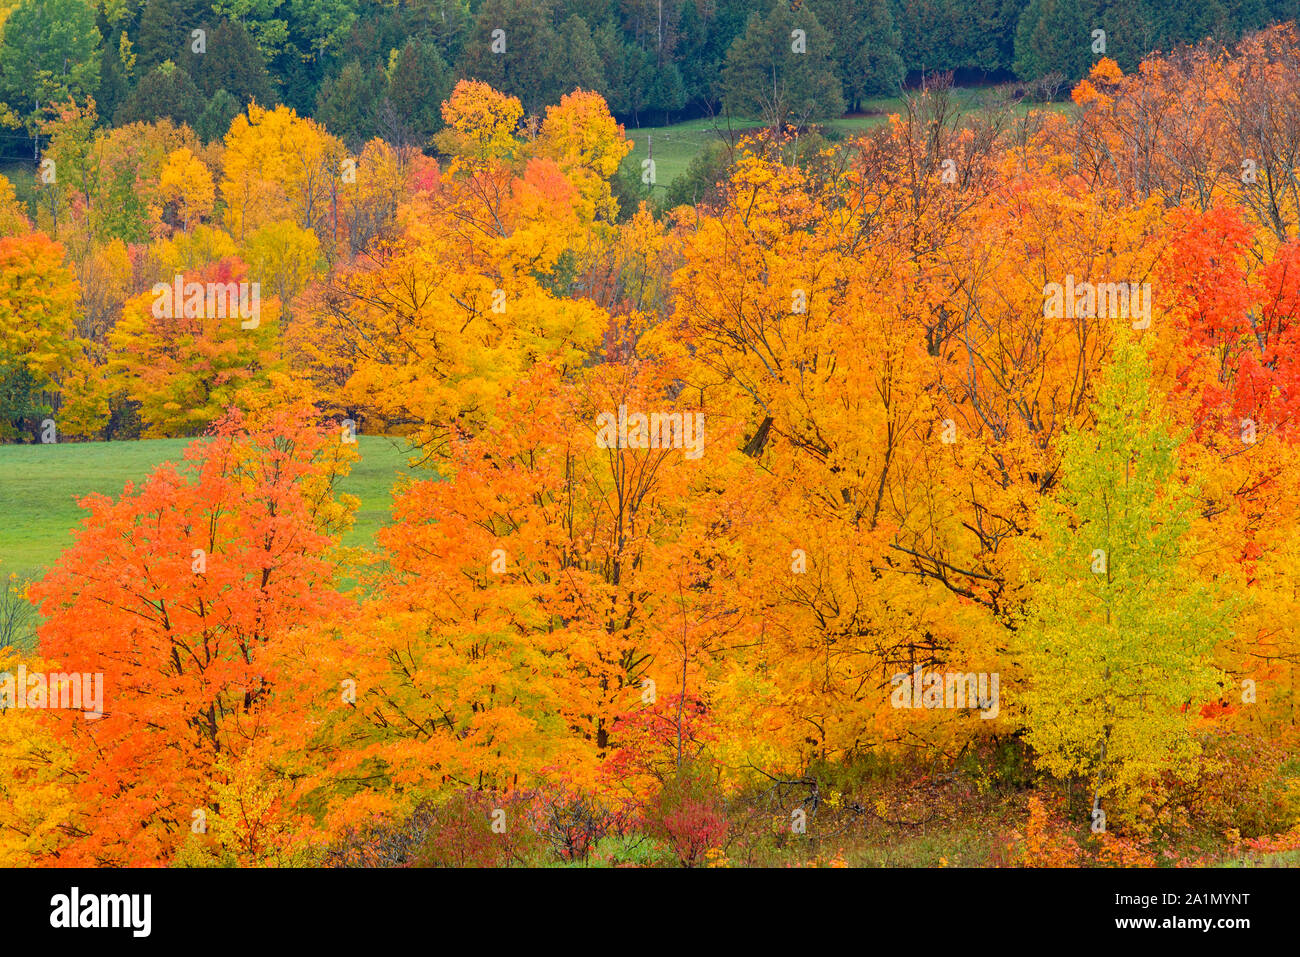 Pastures and autumn trees, Townline Road, Manitoulin Island, Ontario, Canada Stock Photo